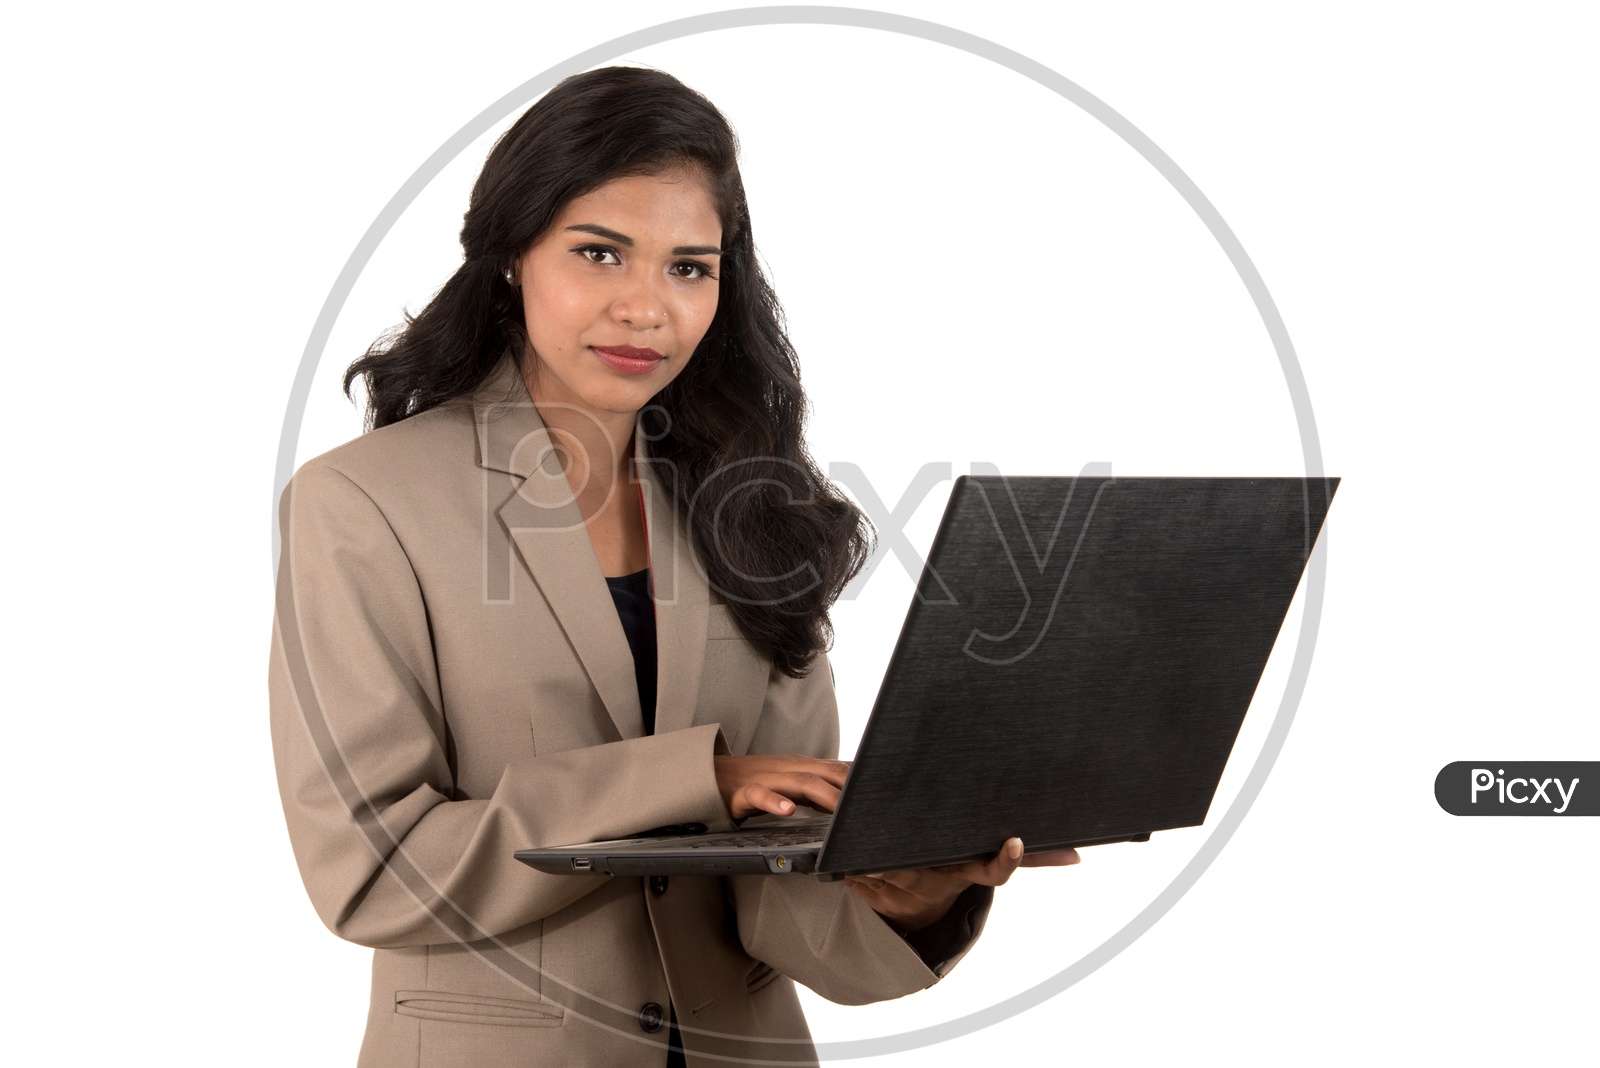 Young Indian business woman using a laptop